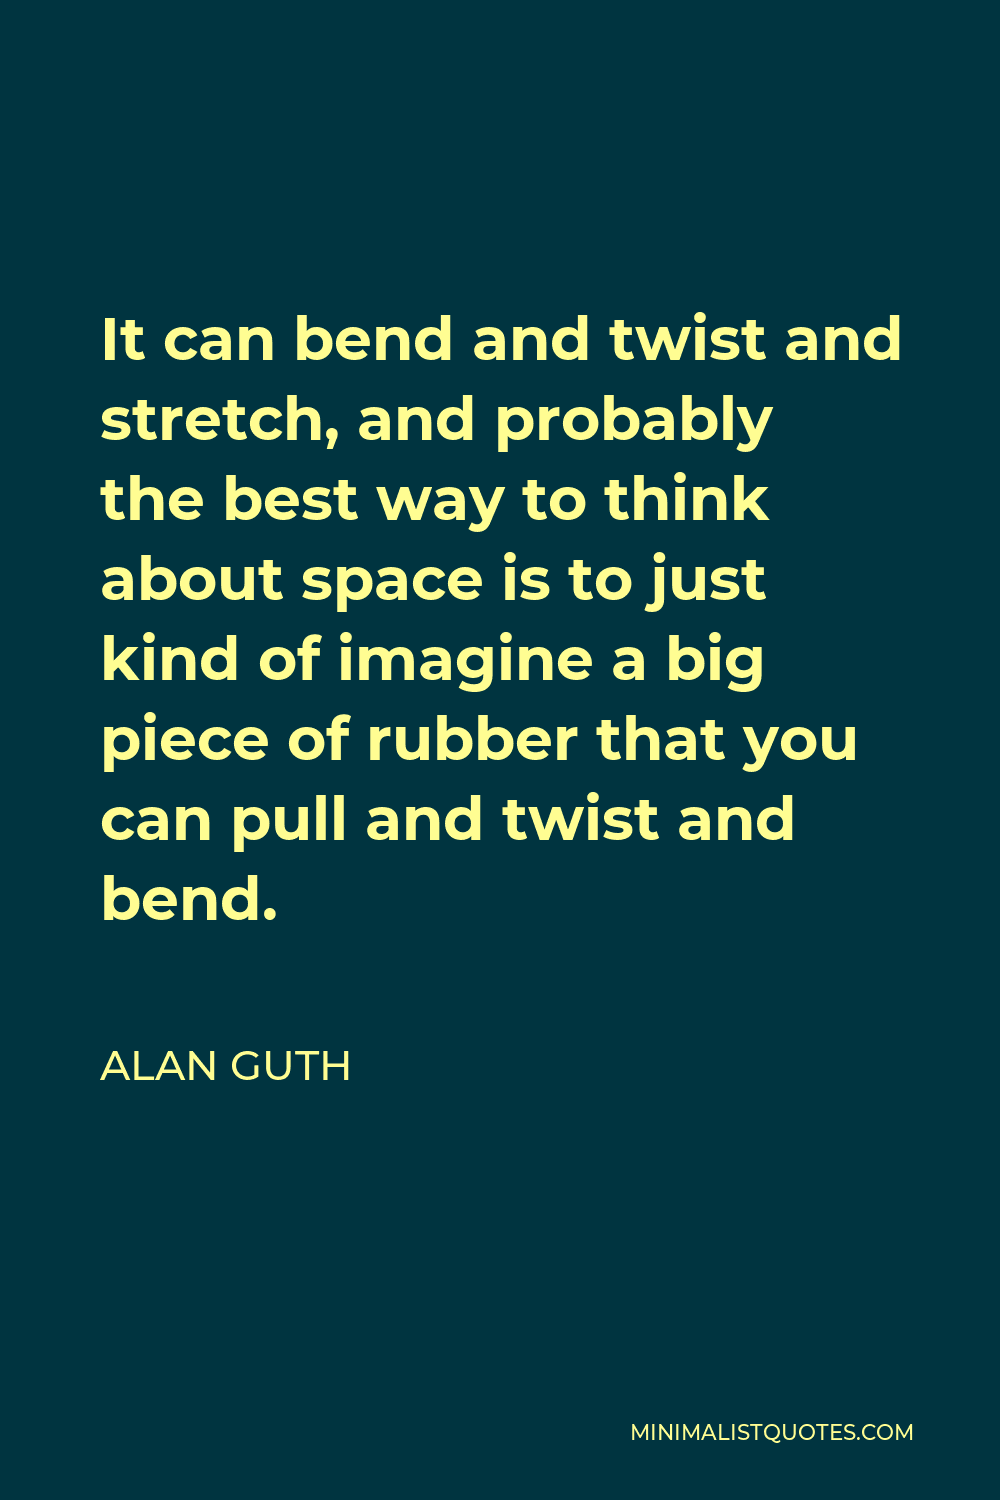 Alan Guth Quote - It can bend and twist and stretch, and probably the best way to think about space is to just kind of imagine a big piece of rubber that you can pull and twist and bend.